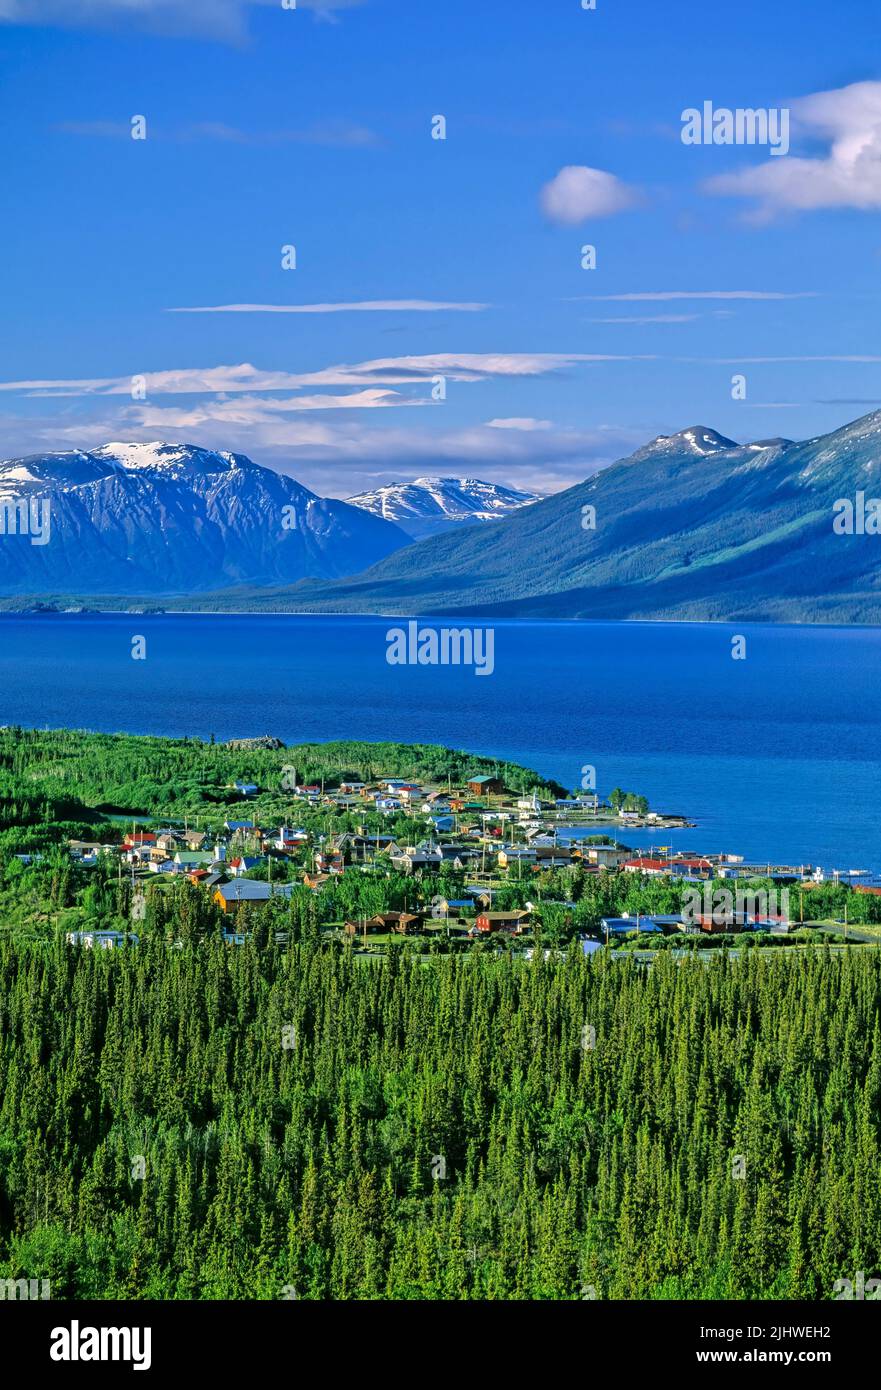 An areaial view of the small town of Atlin situated on the shores of Atlin Lake in northern British Columbia Canada. Stock Photo